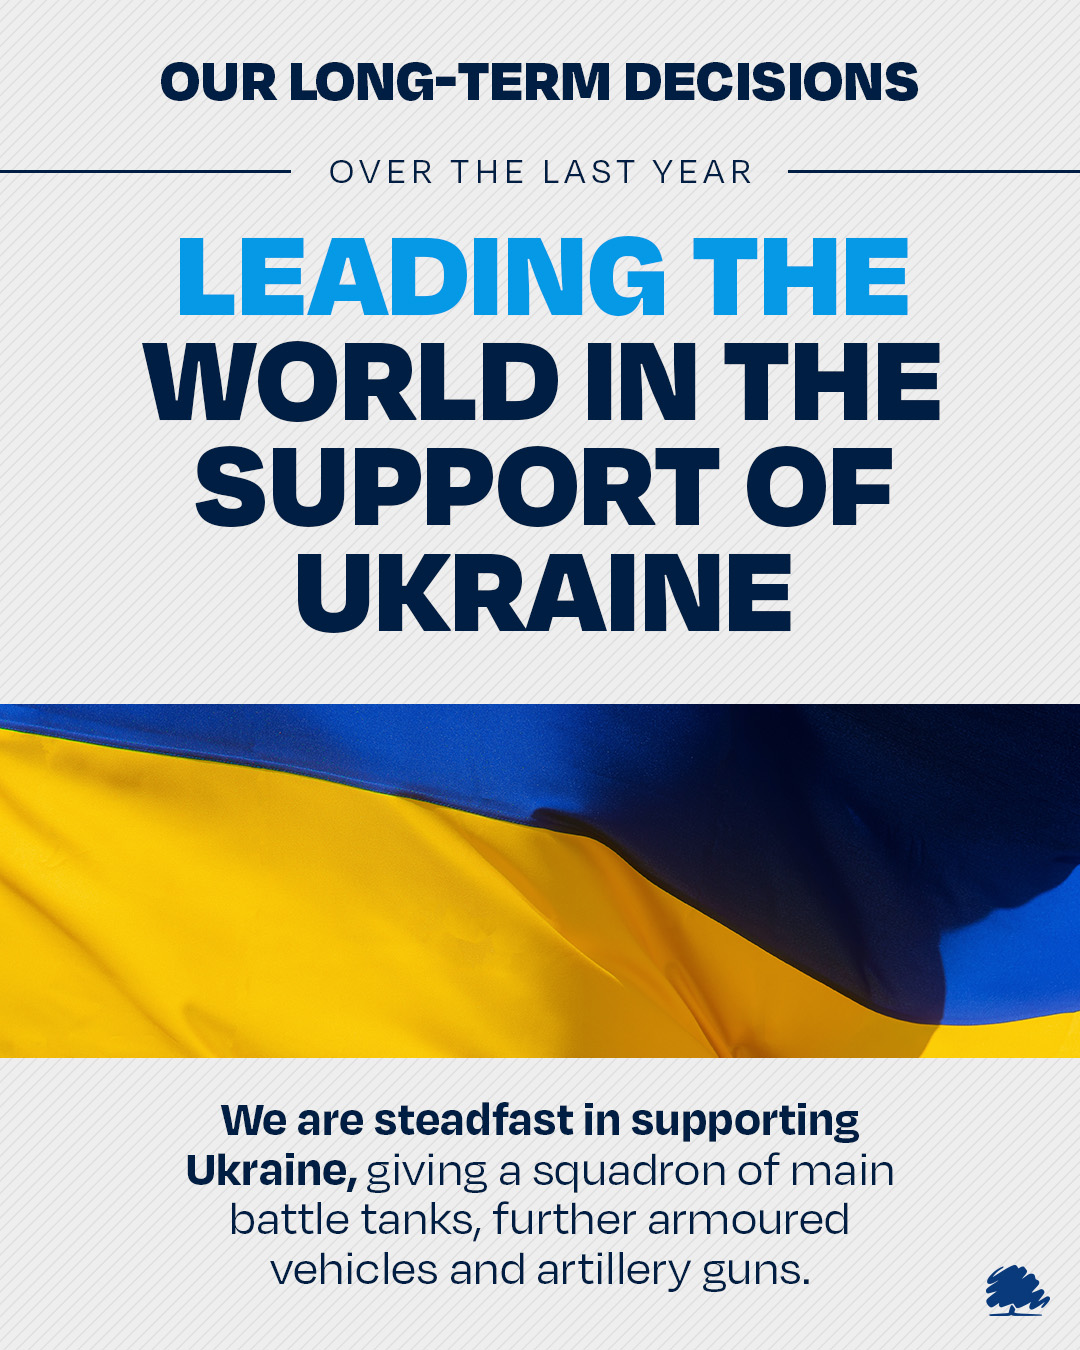 Leading the world on support for Ukraine